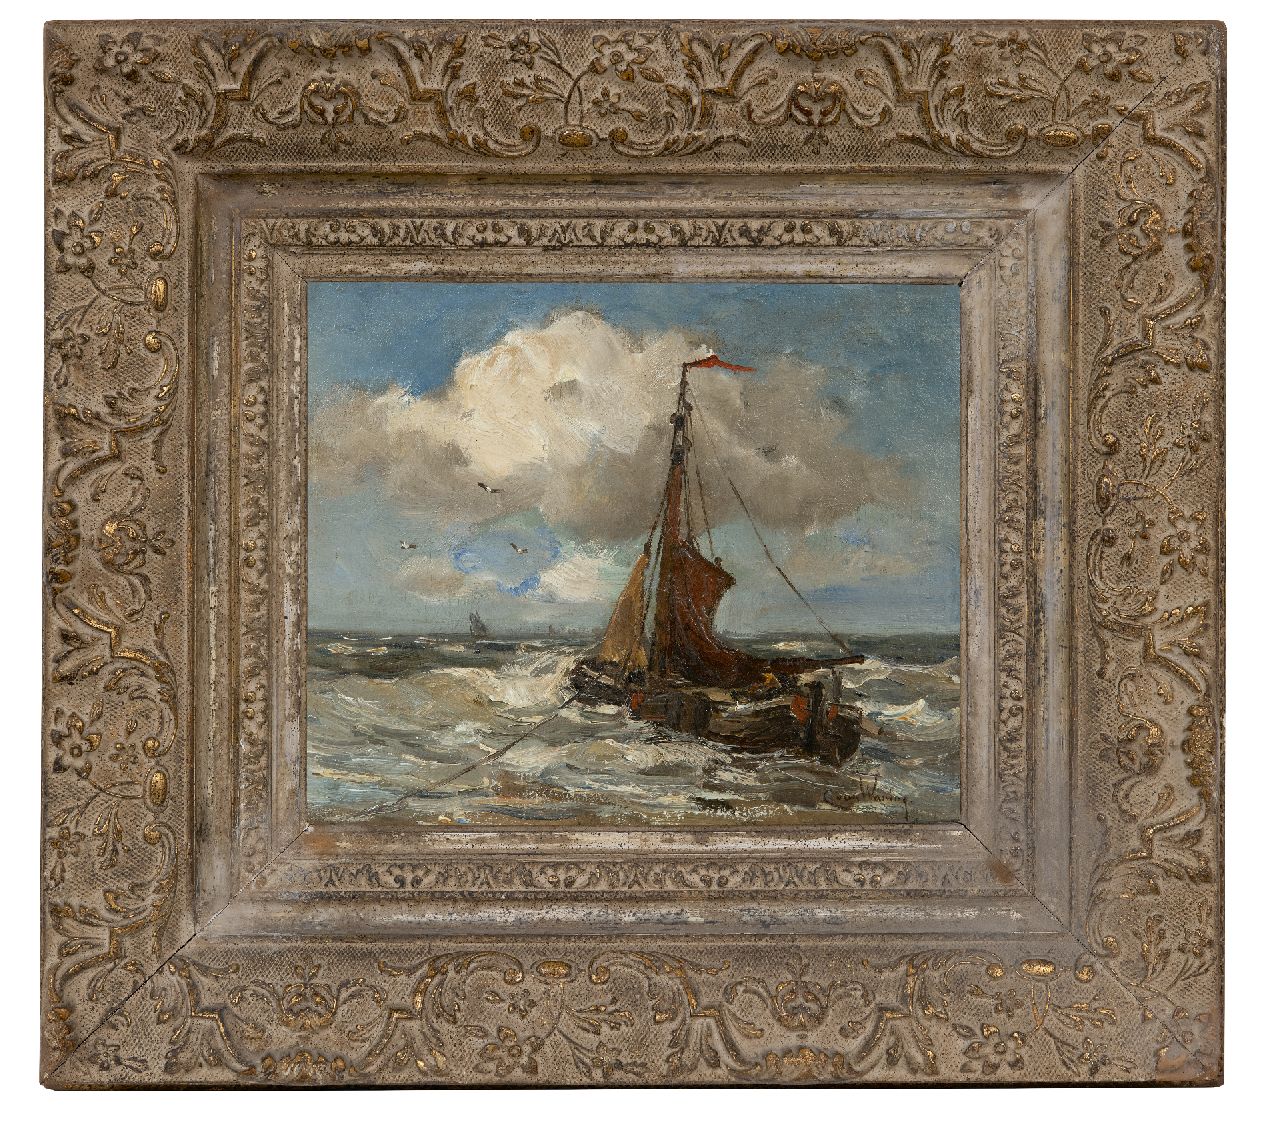 Waning C.A. van | Cornelis Anthonij 'Kees' van Waning | Paintings offered for sale | Fishing barge moored in the surf, oil on canvas 25.2 x 31.0 cm, signed l.r.